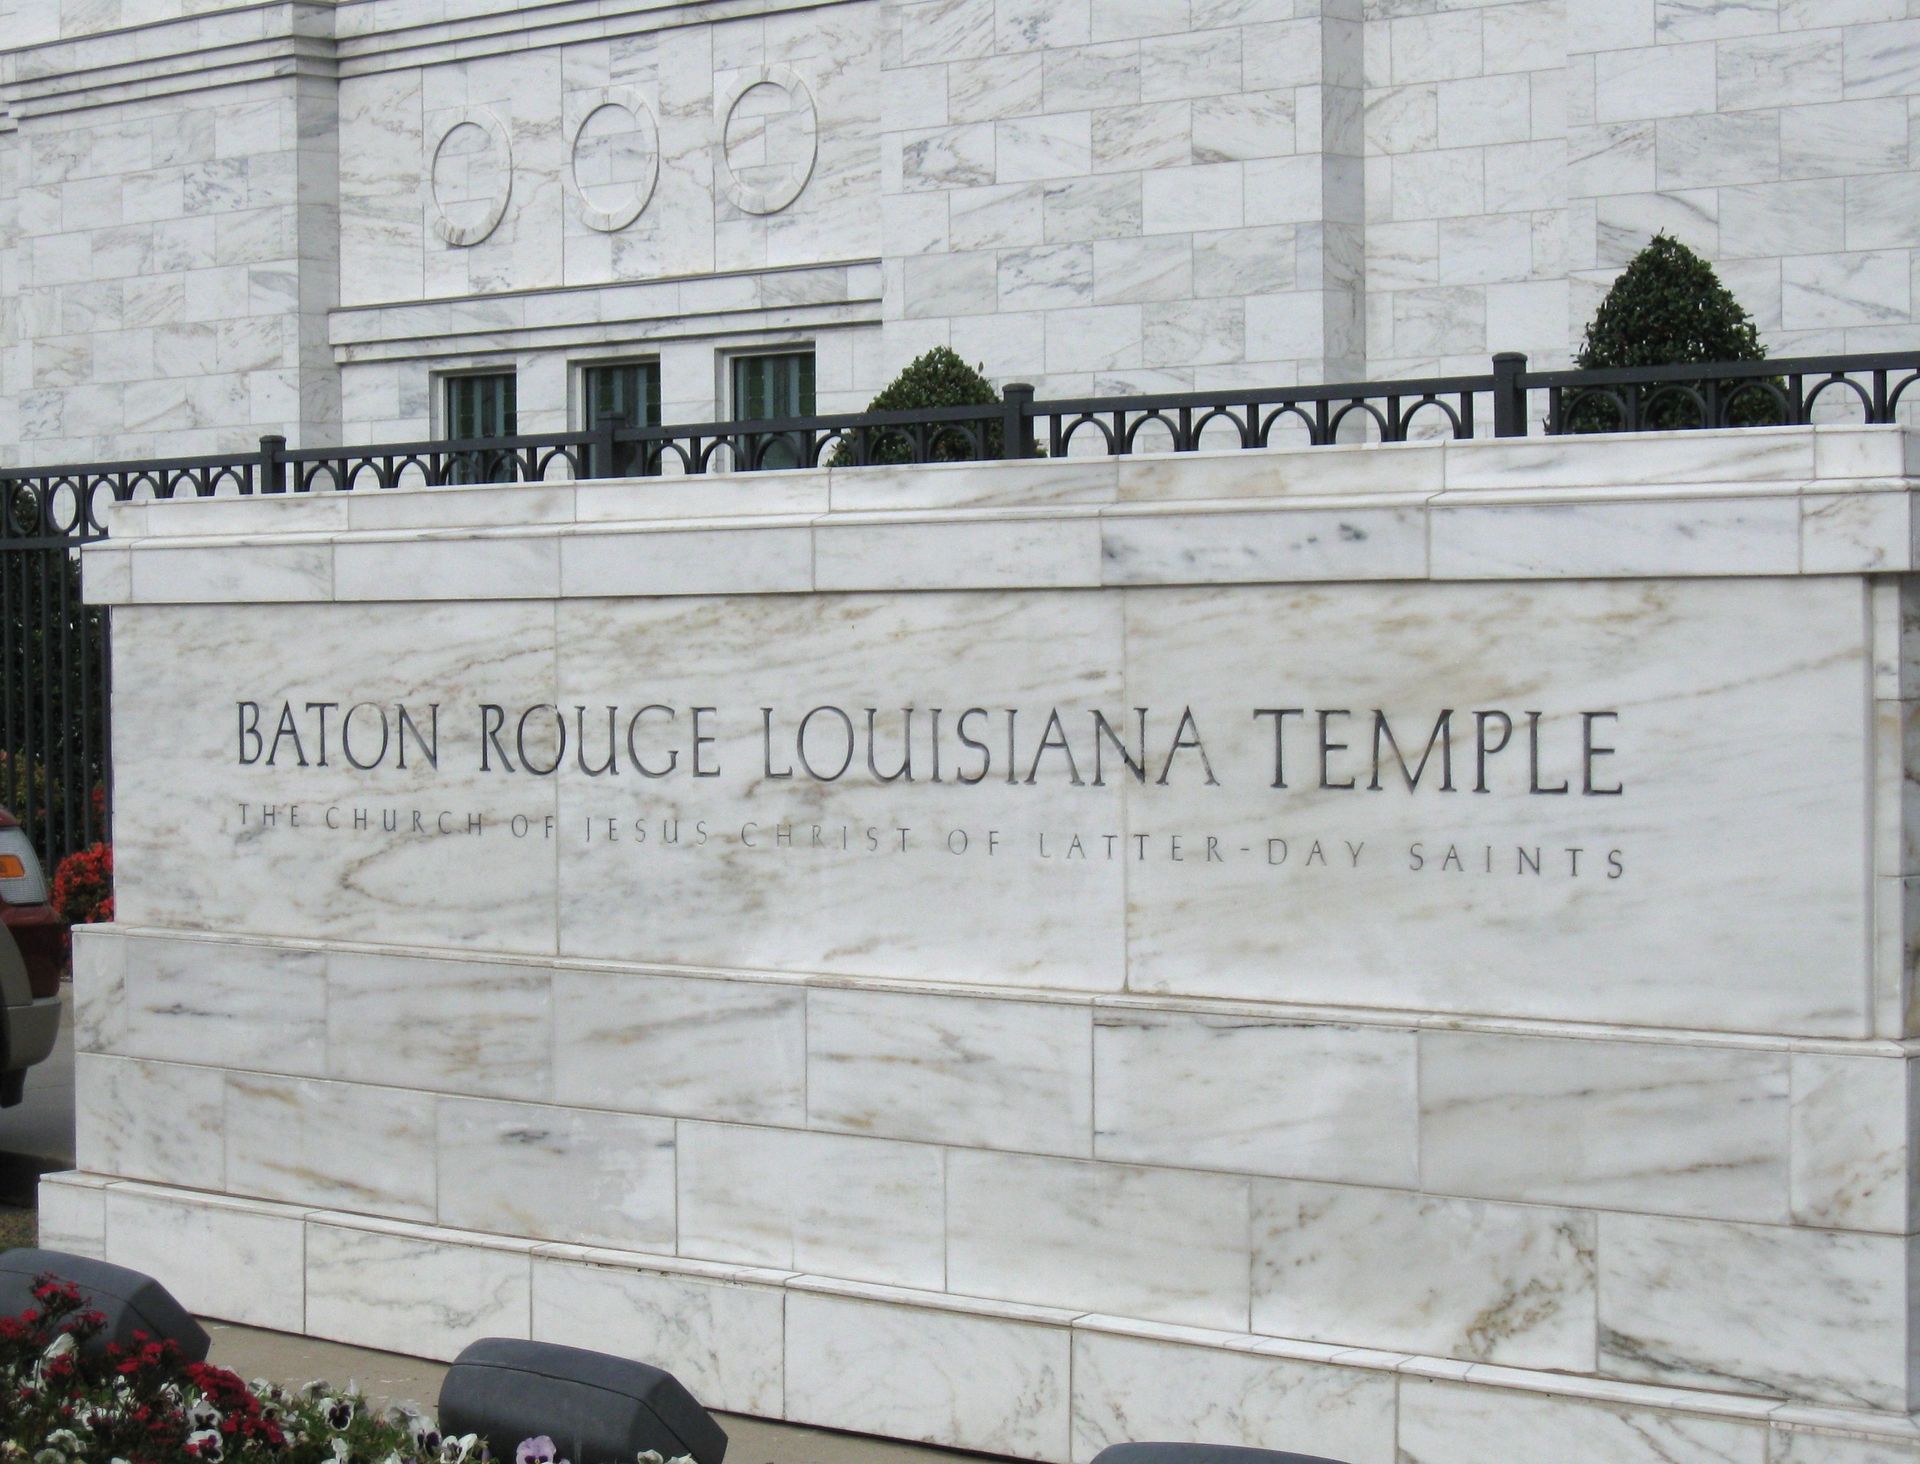 The temple name sign for the Baton Rouge Louisiana Temple.